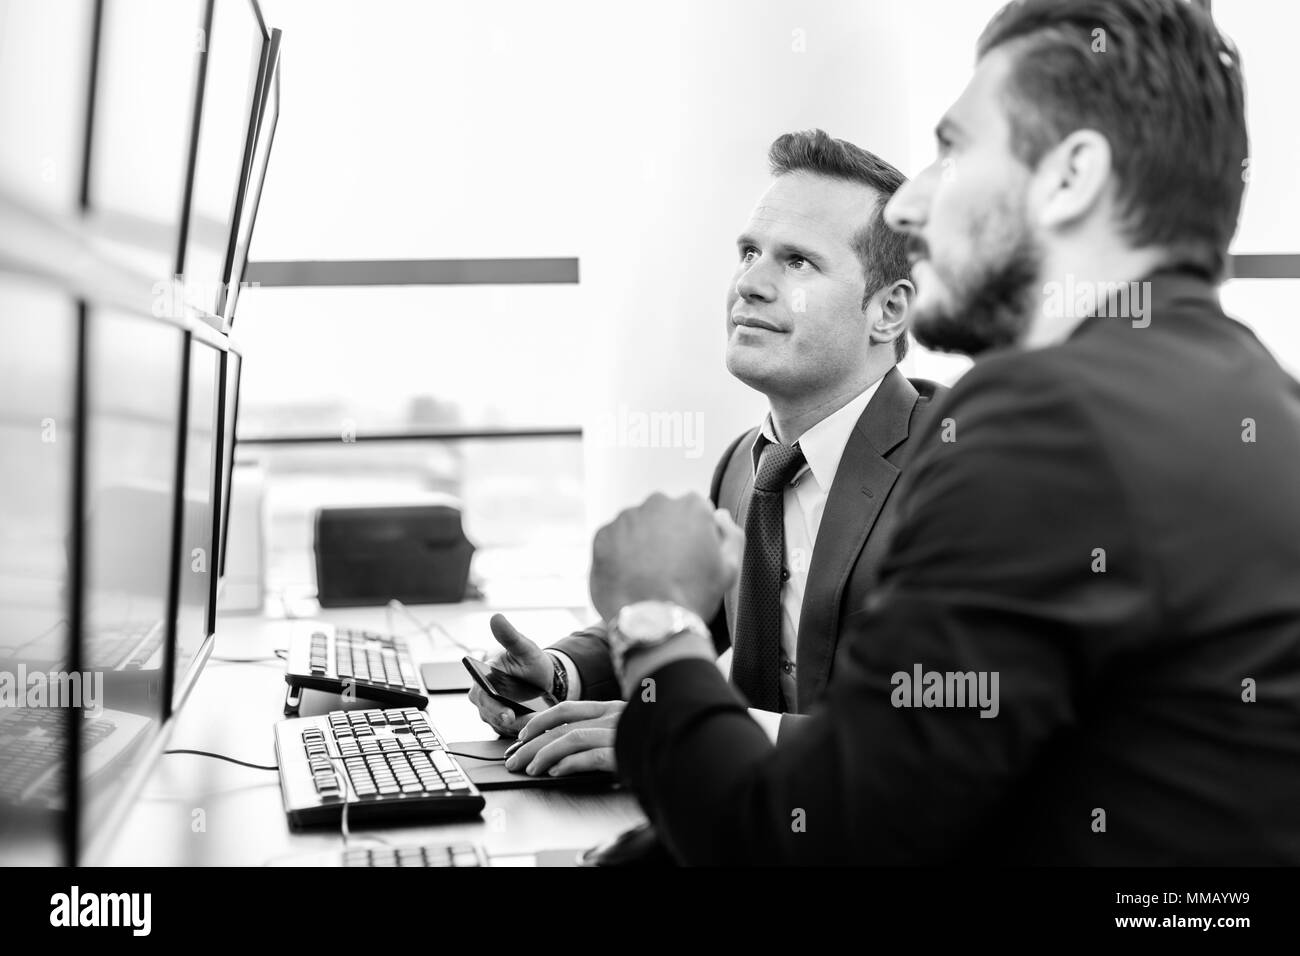 Successful businessmen trading stocks. Stock traders looking at graphs, indexes and numbers on multiple computer screens. Colleagues in traders office Stock Photo